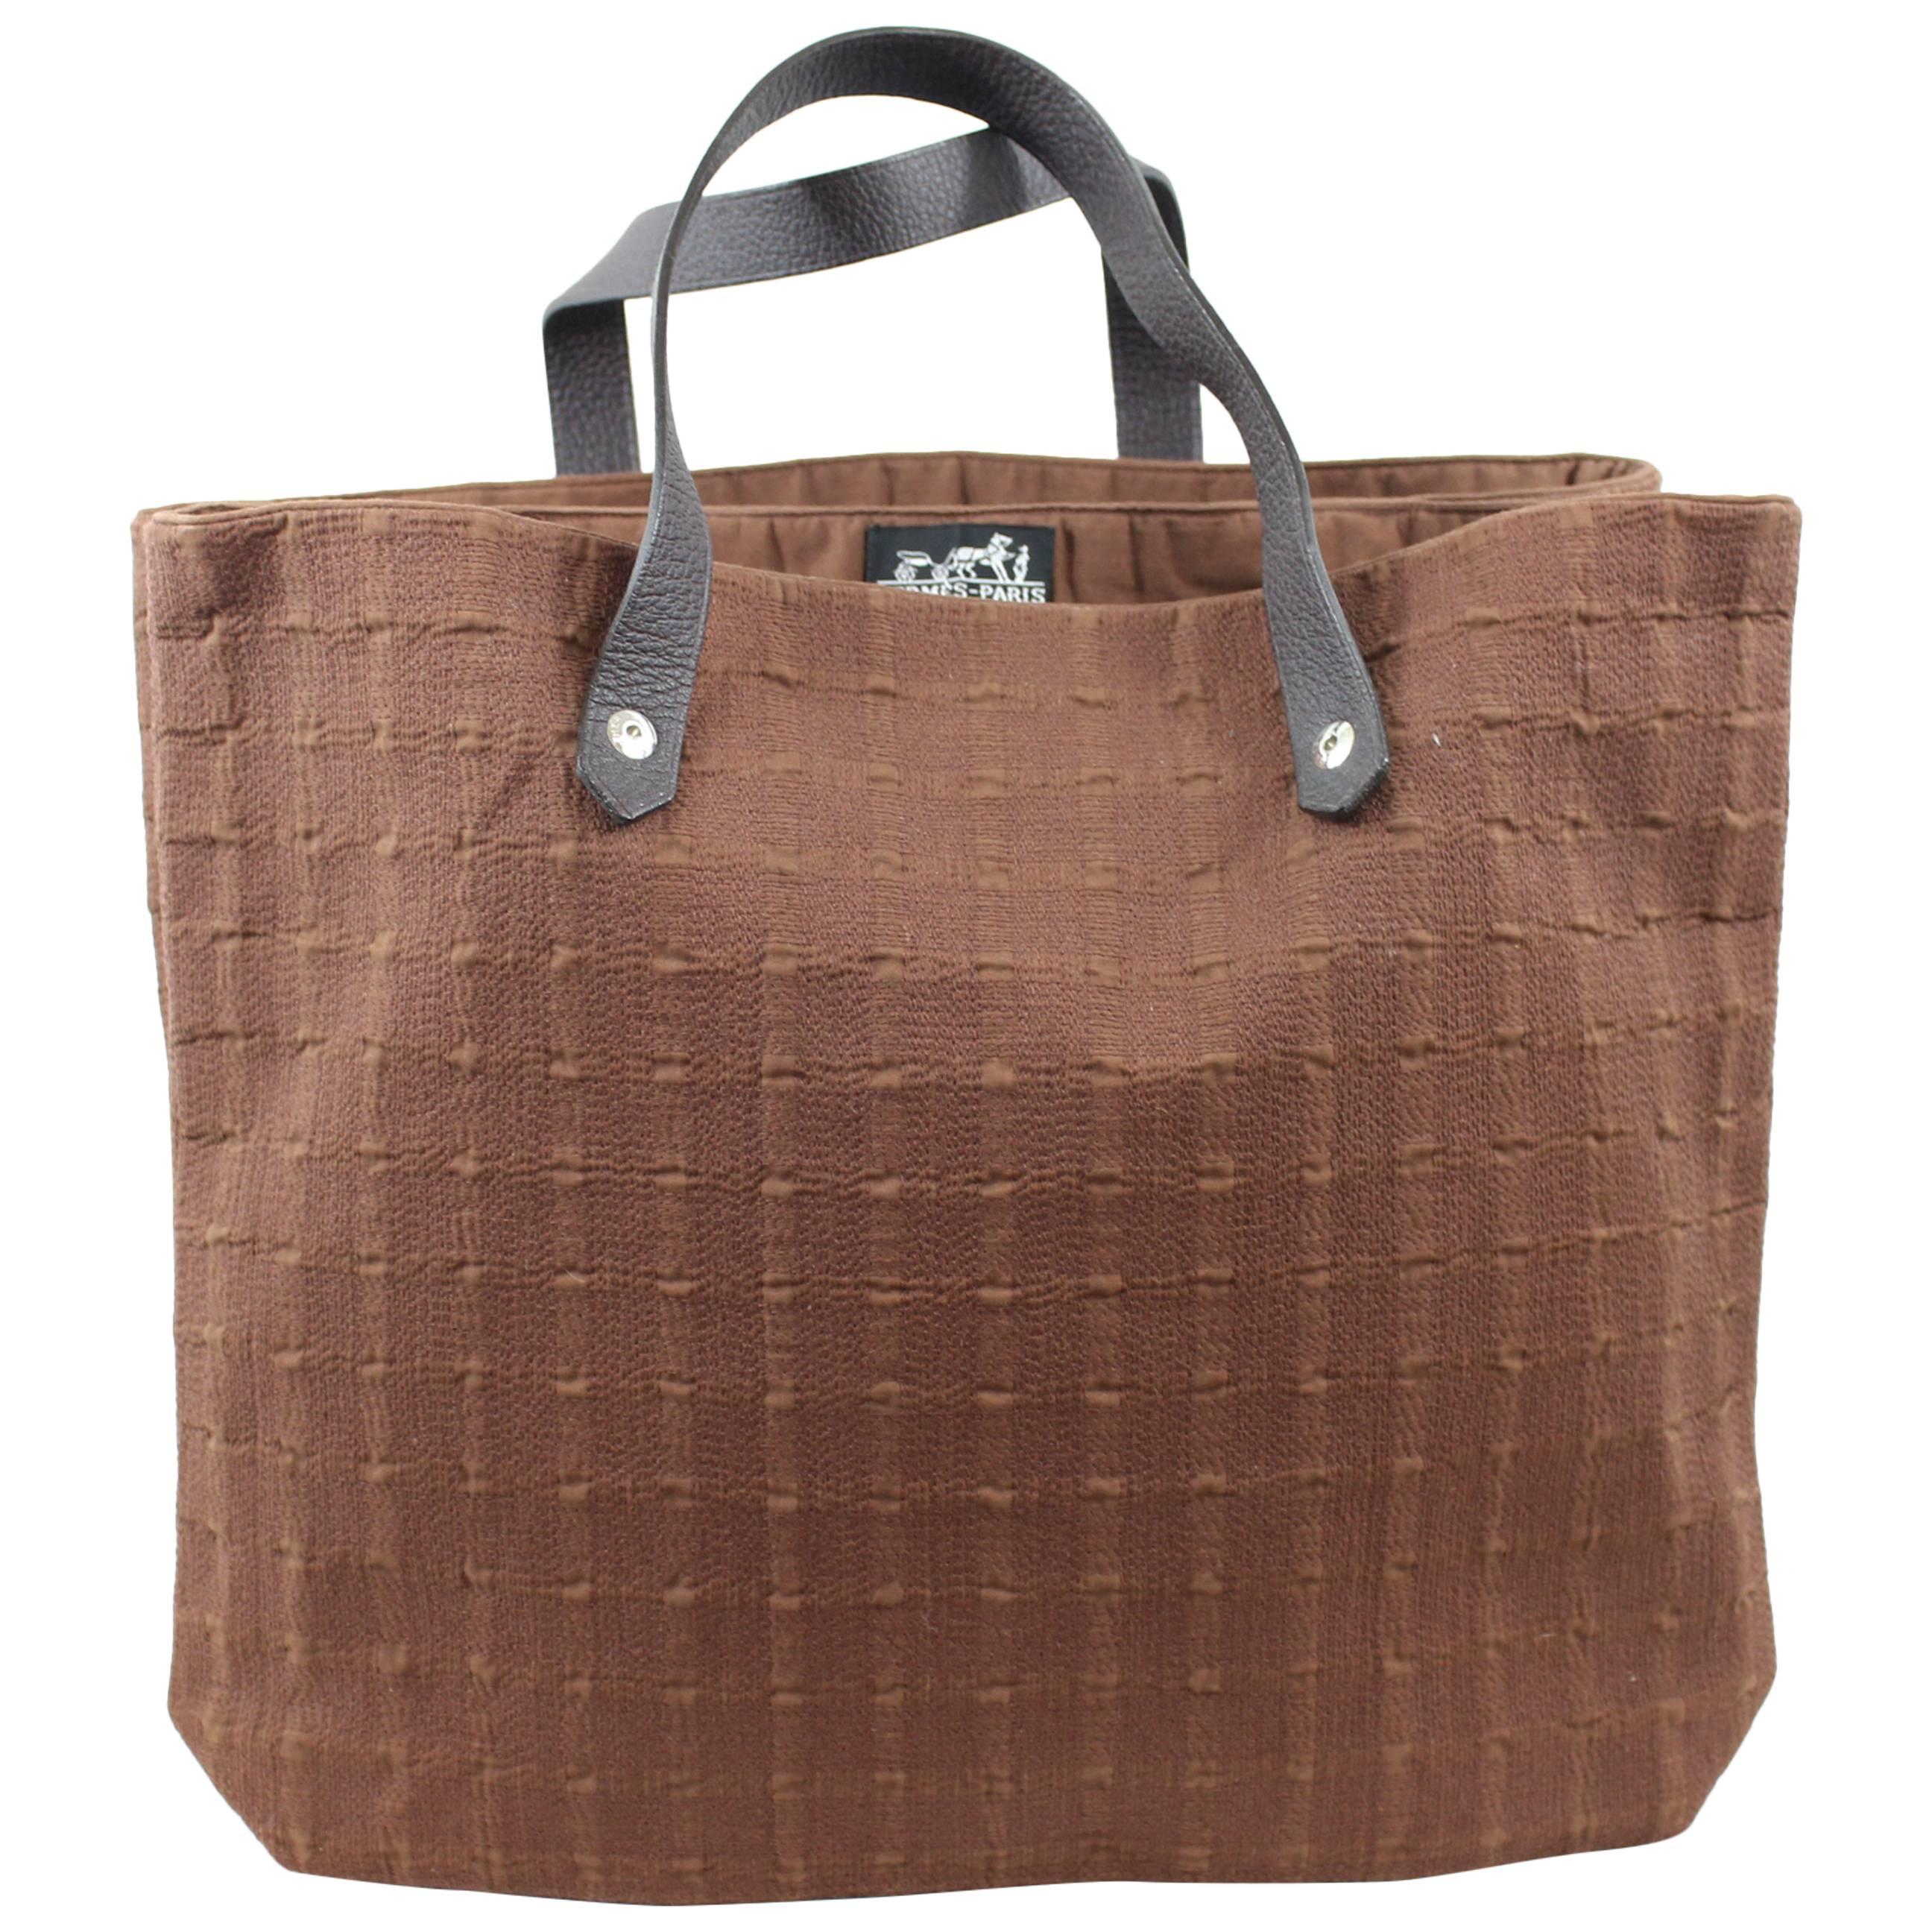 Hermes Double Brown Tote Bag in Leather and Cotton. 